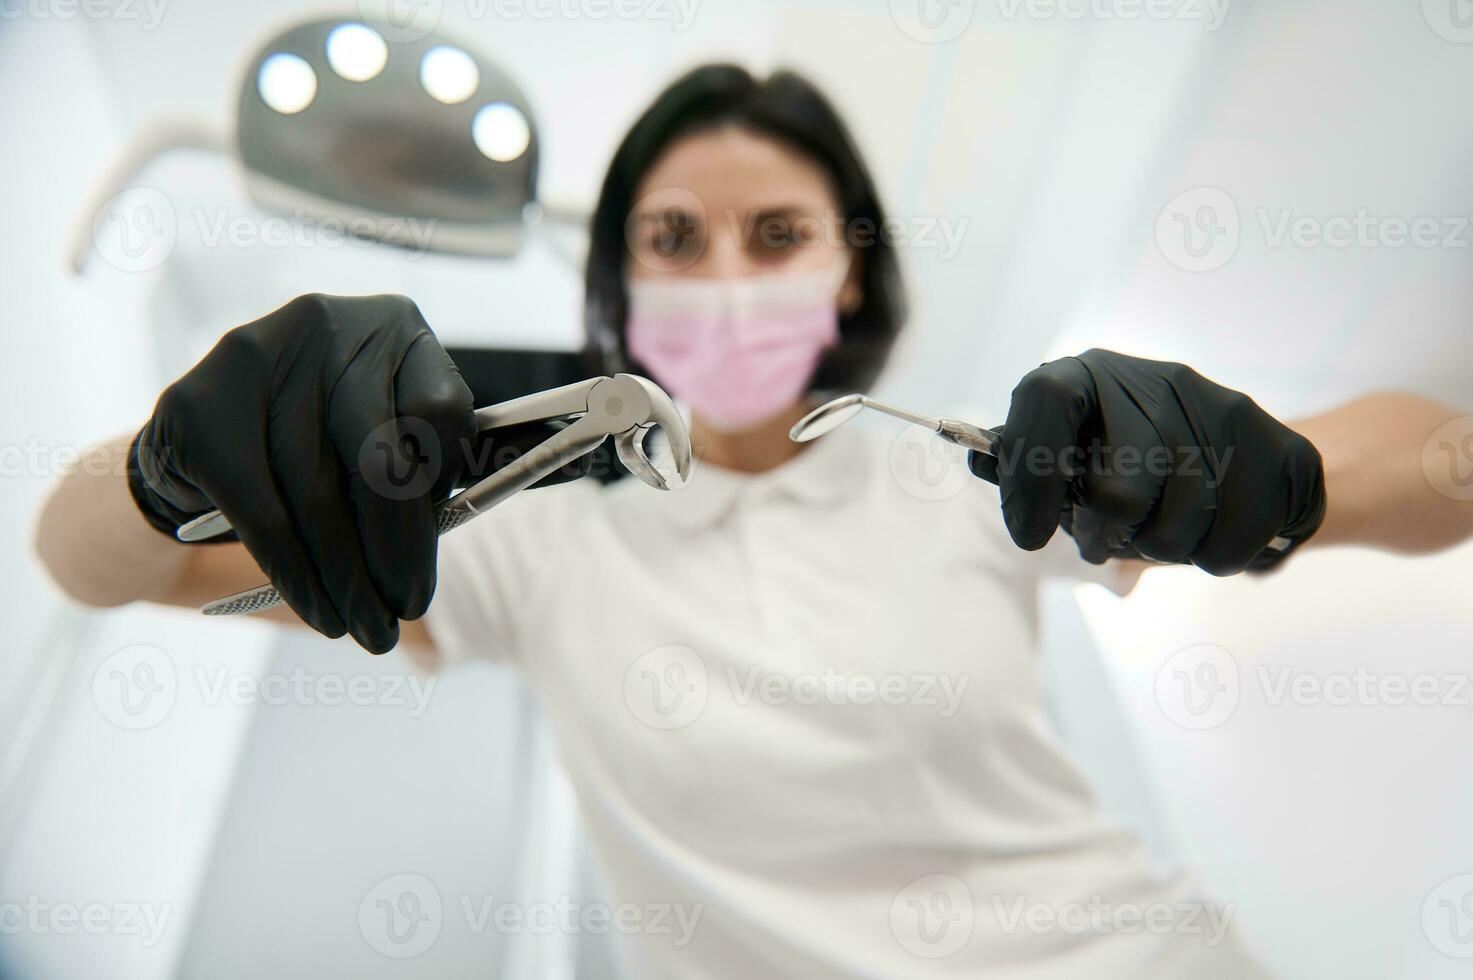 Focus on stainless steel dental instruments, extraction forceps and dental mirror in the hands of blurred dentist in surgical gloves and medical mask leaning towards the patient for an examination photo